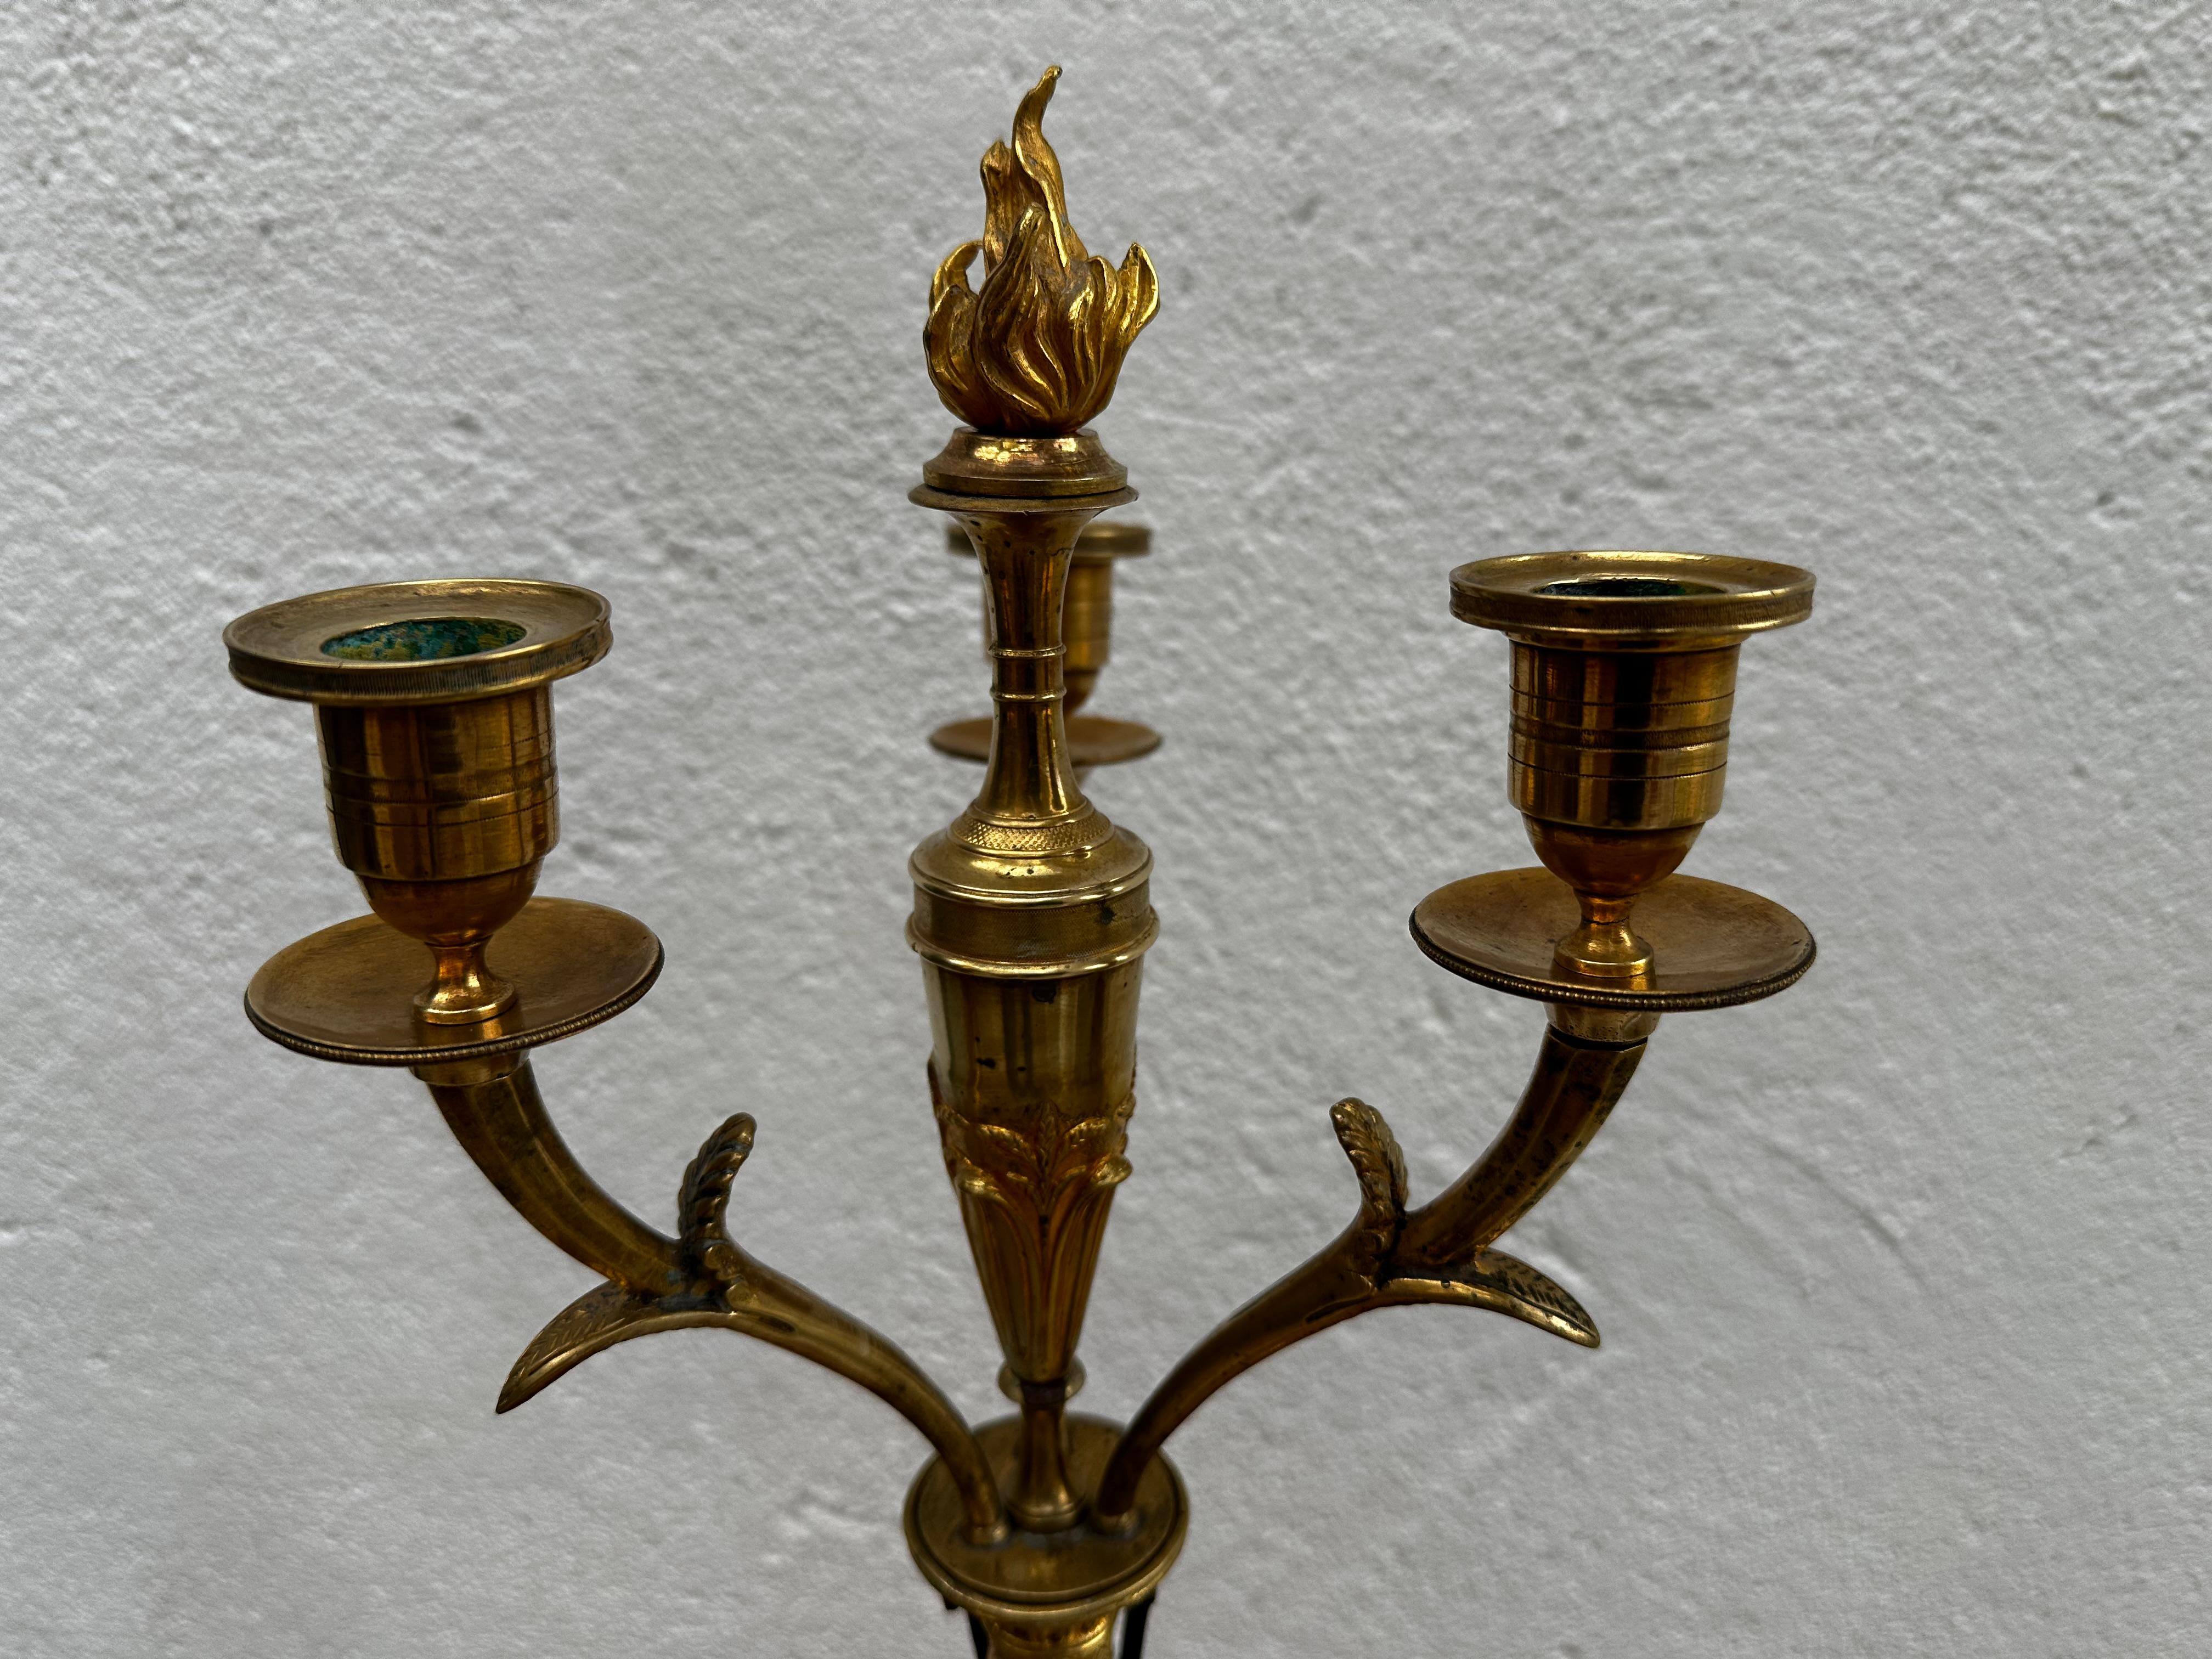 Candelabras with place for three candles, made in Berlin about 1810. Gilded and patinated bronze. Decorated with a standing griffin with a women's face, gilded decorations and lion feets in the bottom part.